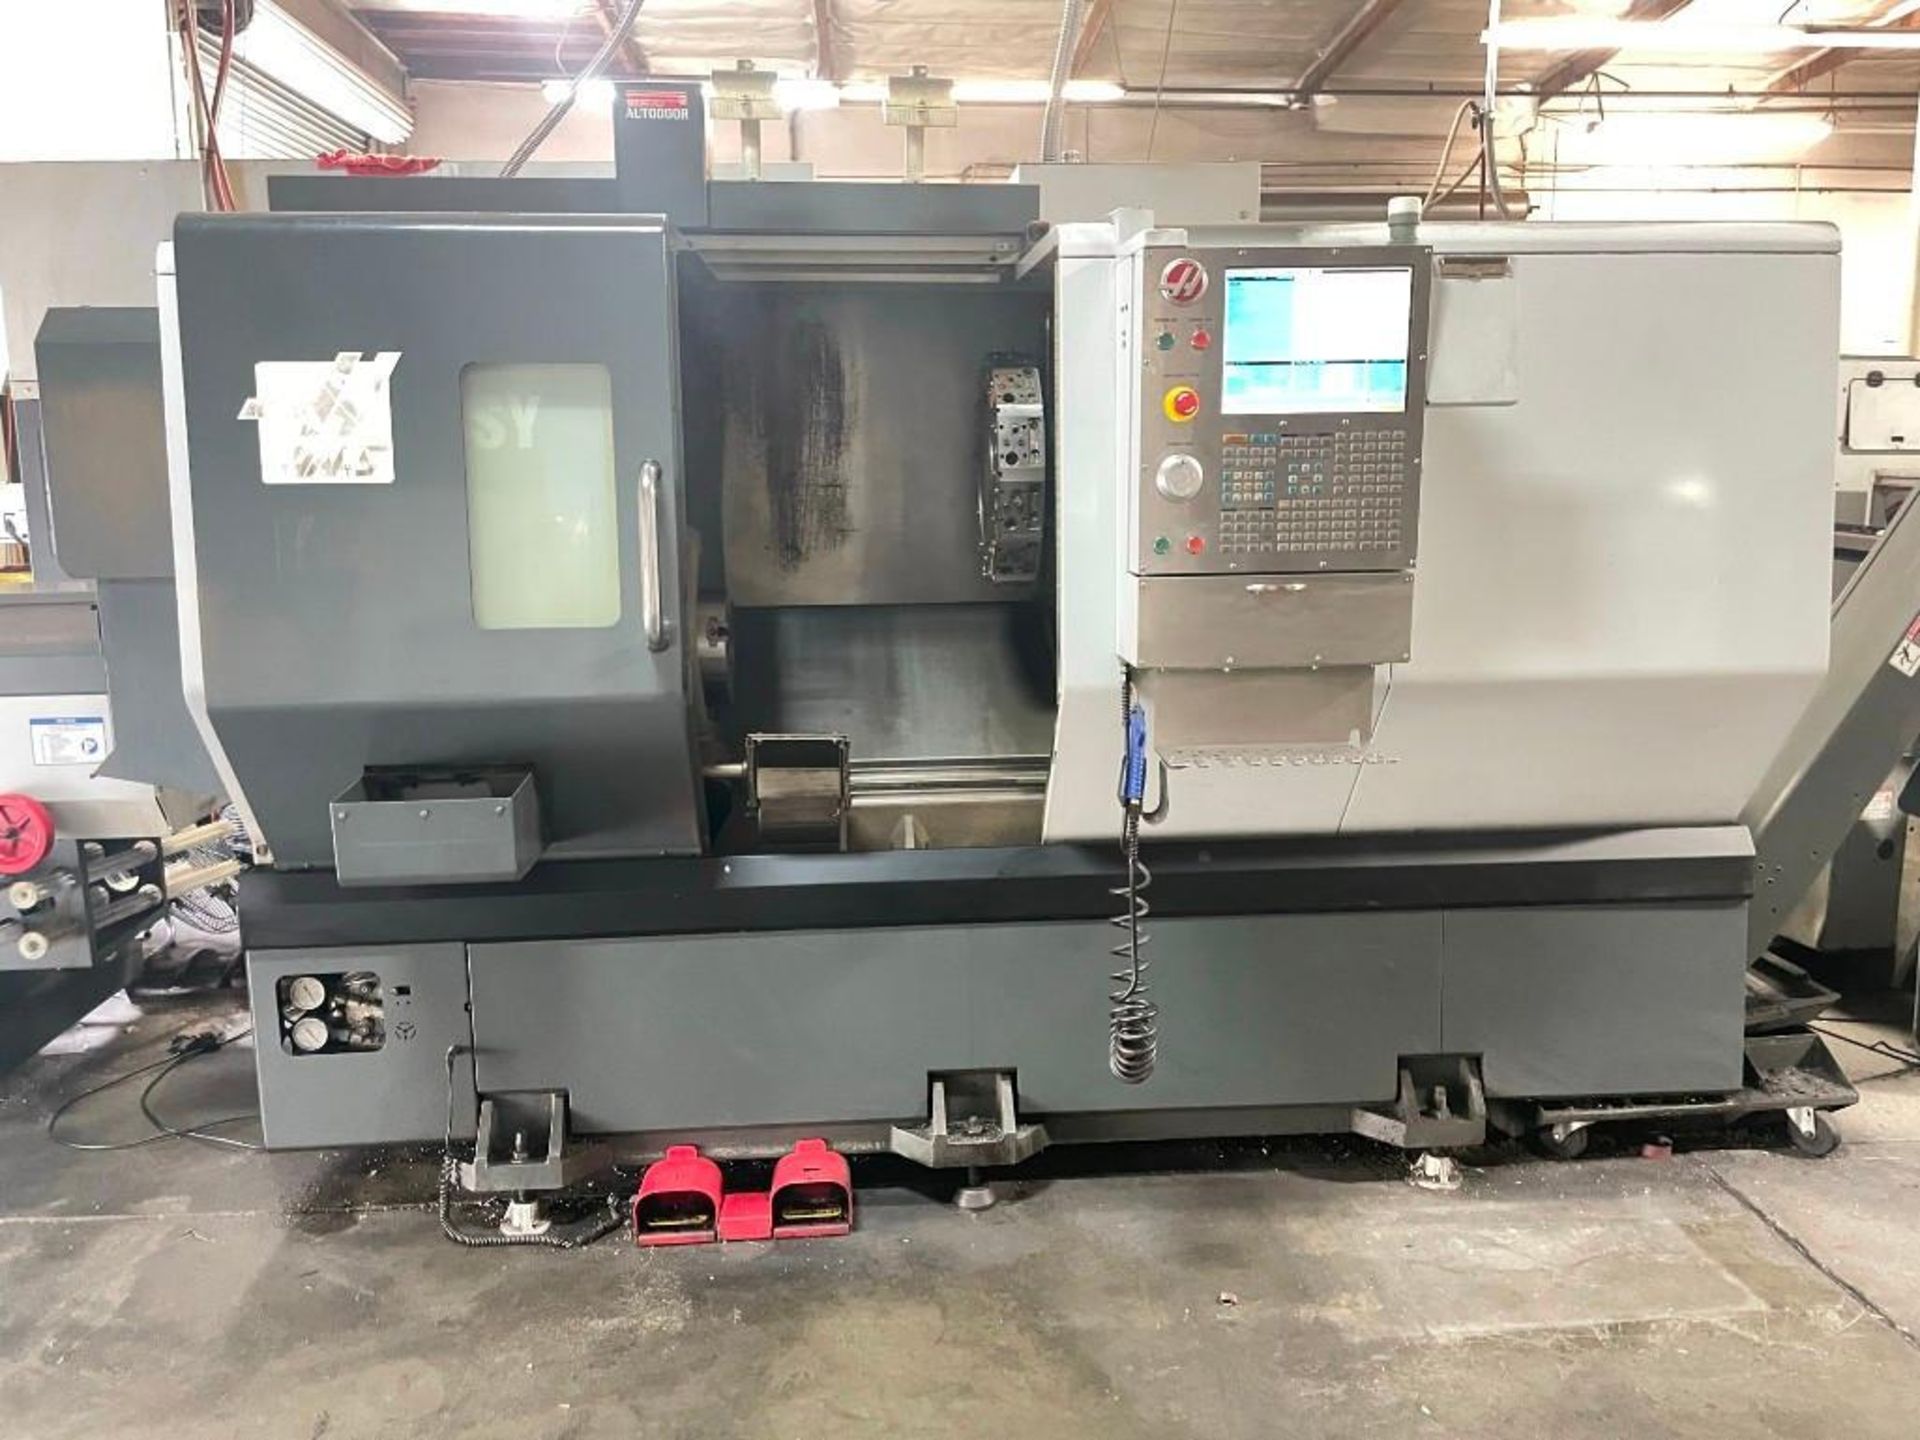 Haas ST30SSY, Y-Axis, Live, No Sub, Parts Catcher, Chip Conveyor, s/n 3098450, New 2014 - Image 2 of 6